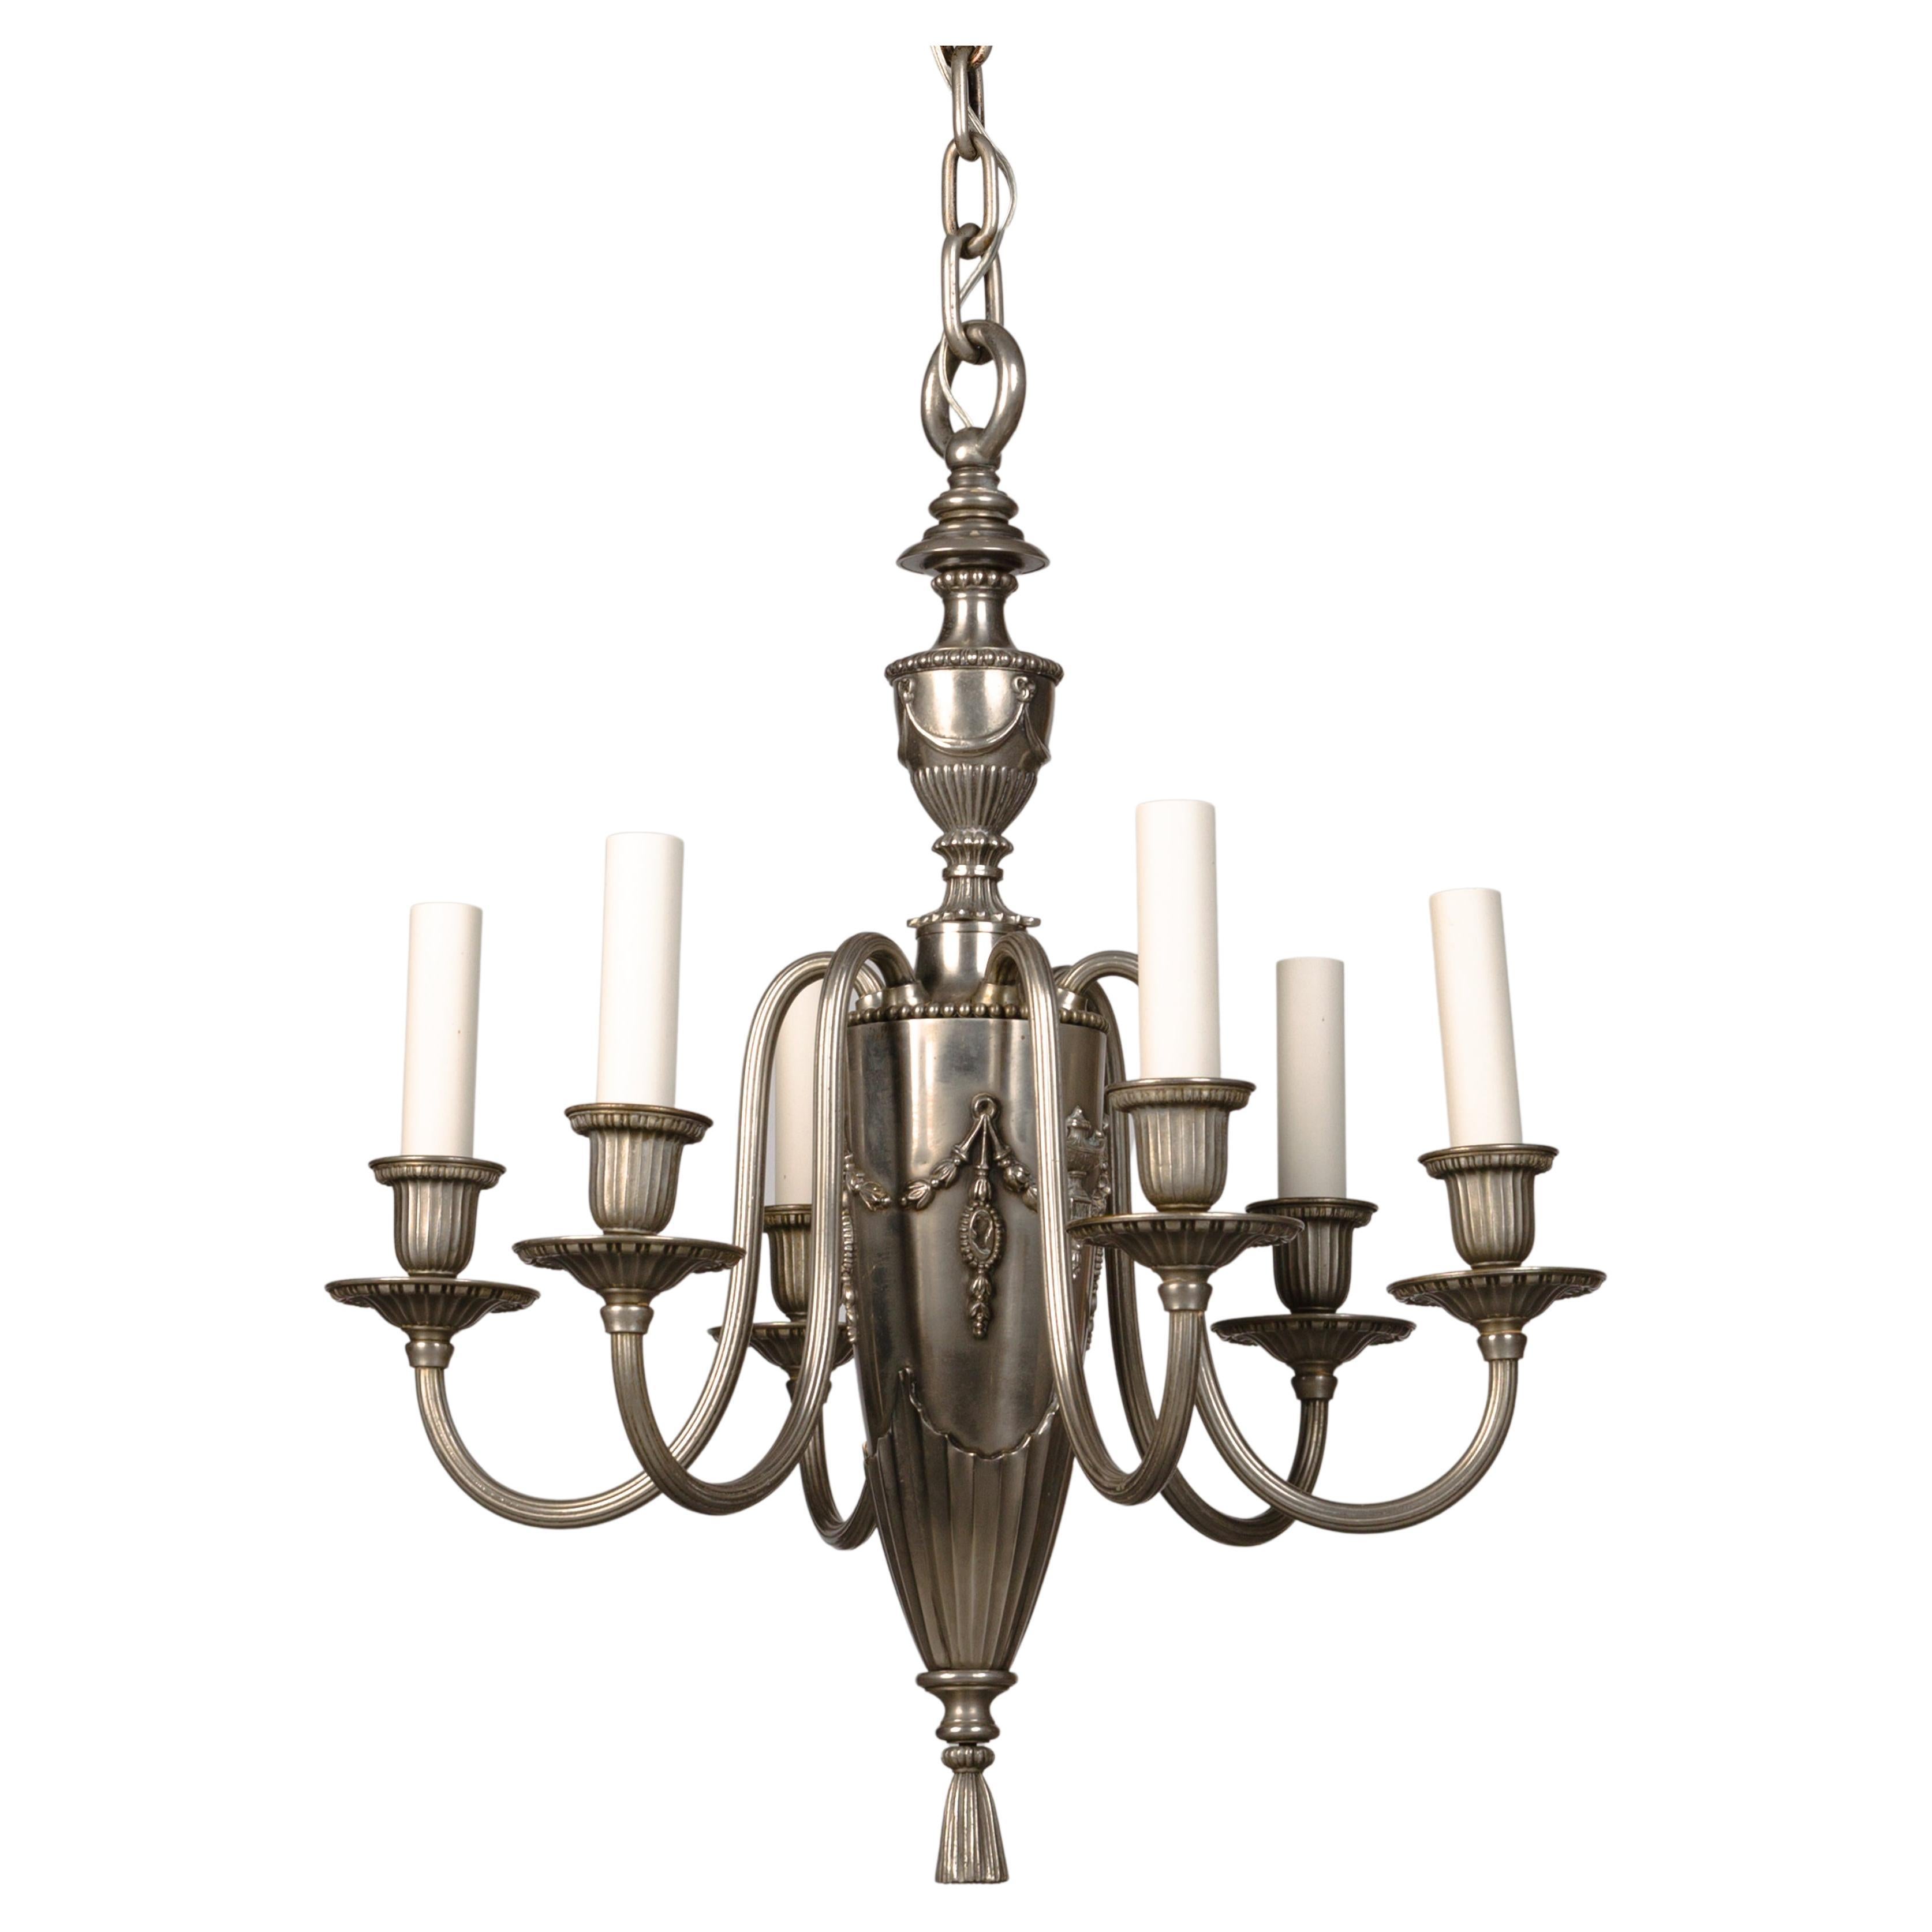 Six Arm Adam Style Chandelier in Antique Nickel by Bradley and Hubbard, c. 1920s For Sale